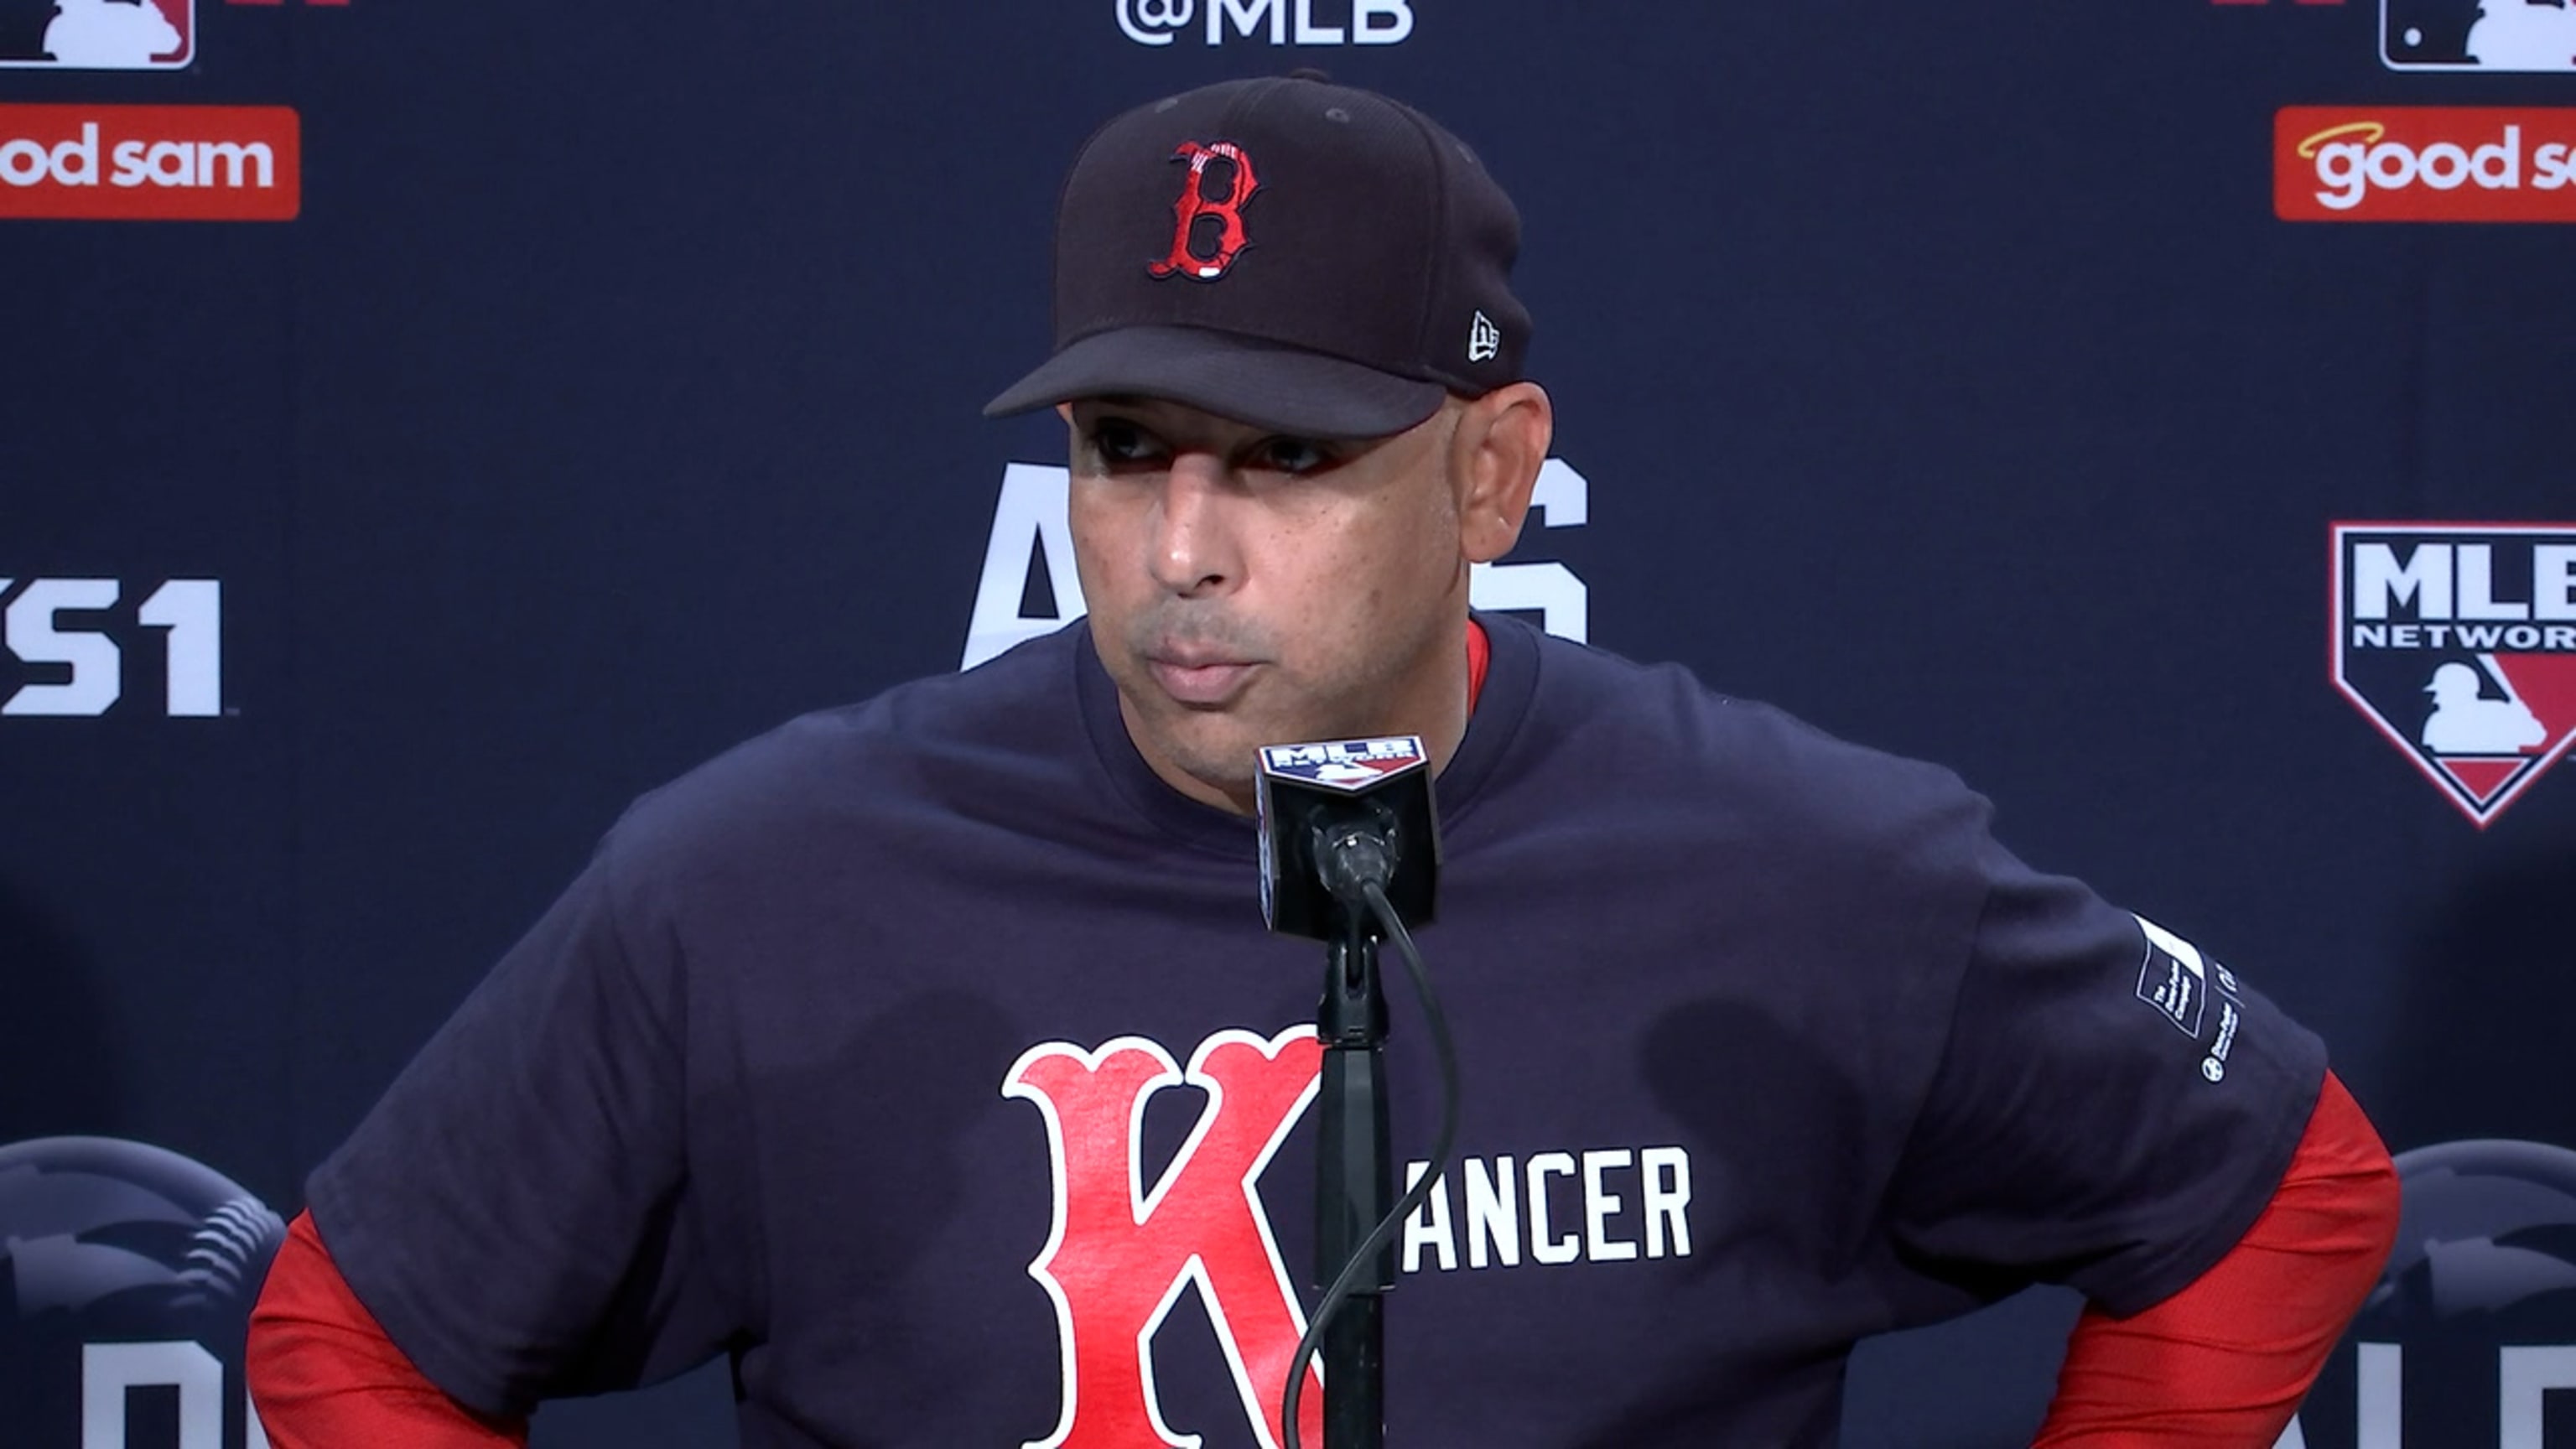 Alex Cora briefly pulls Boston Red Sox off field after fan hits